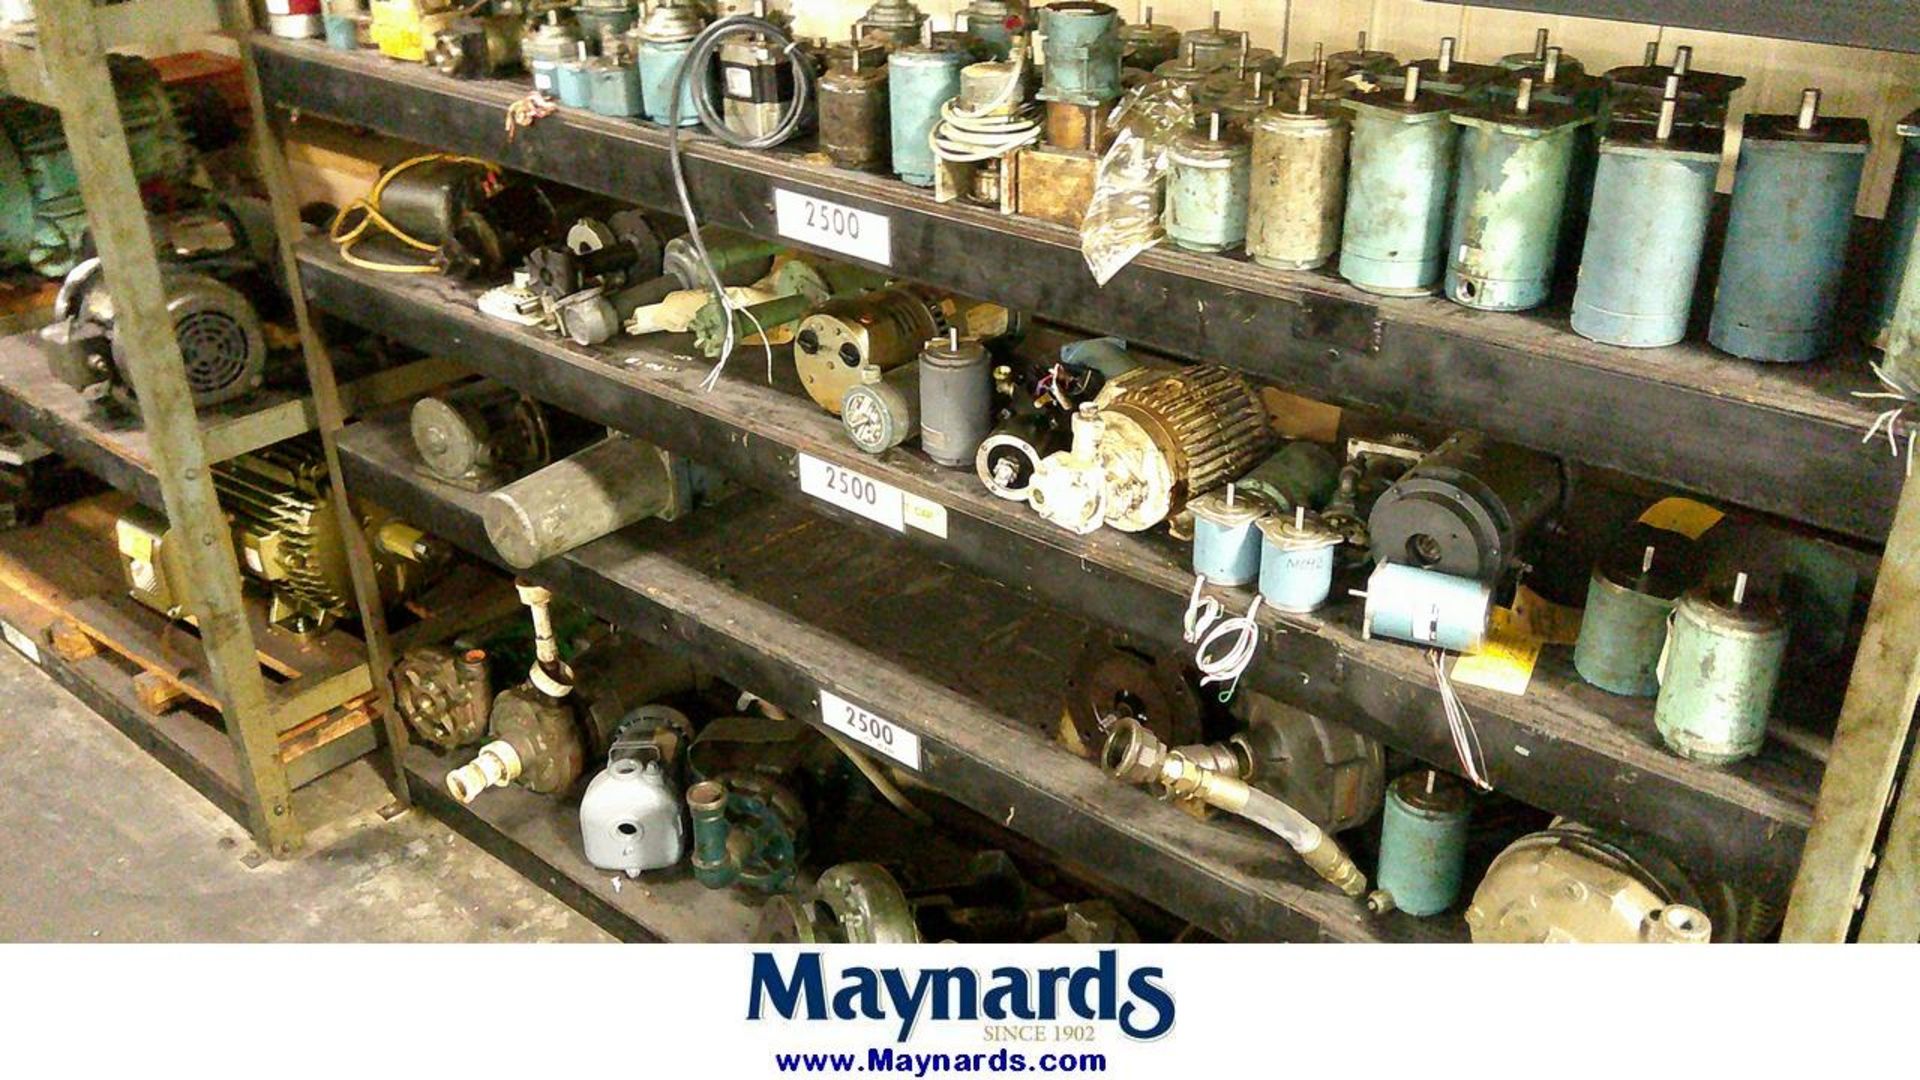 5-Tier Heavy Duty Rack with Remaining Contents of Motors & Centrifugal Pumps